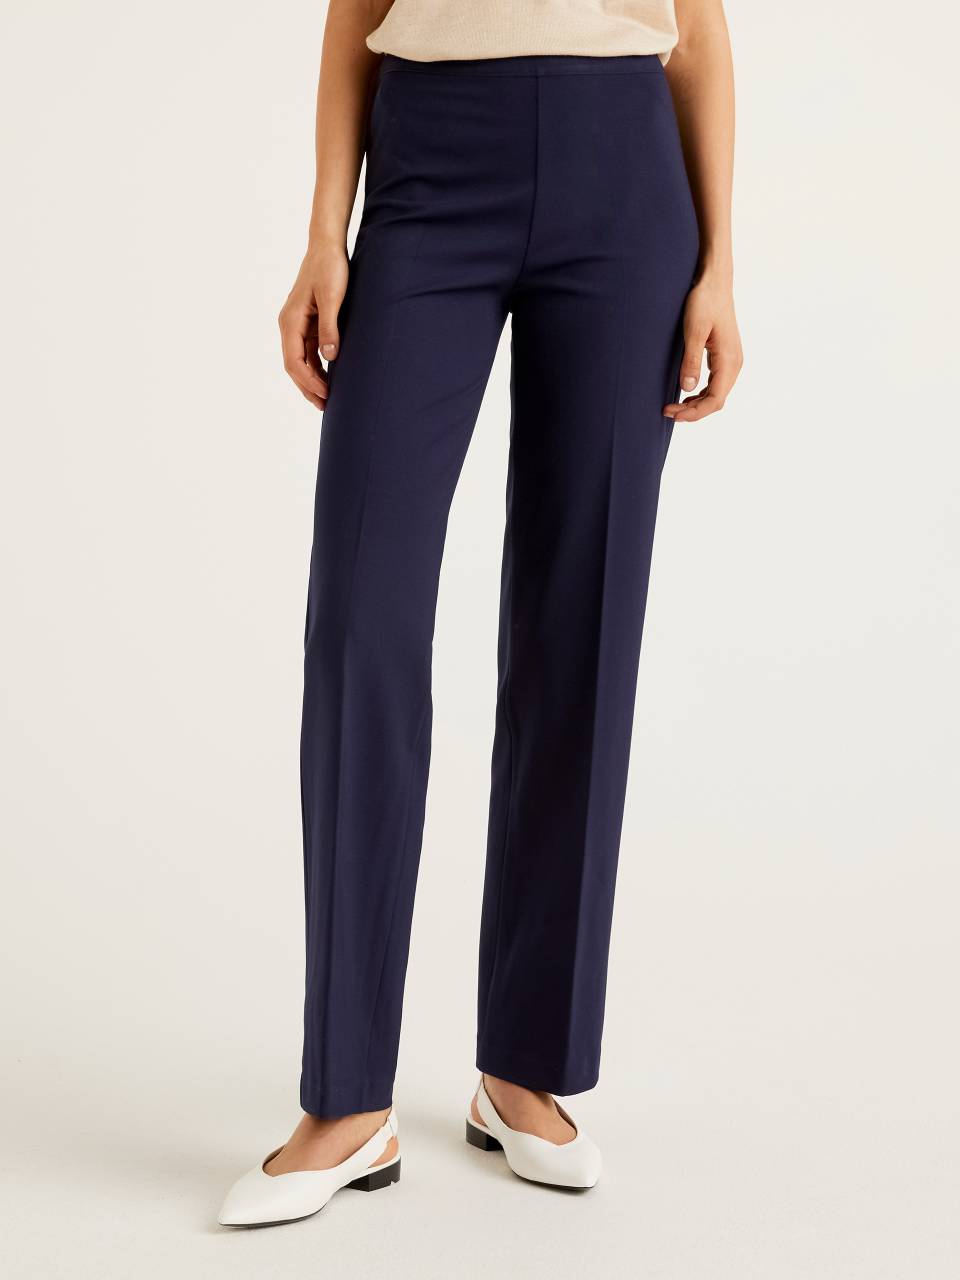 Benetton Straight cut classic trousers. 1